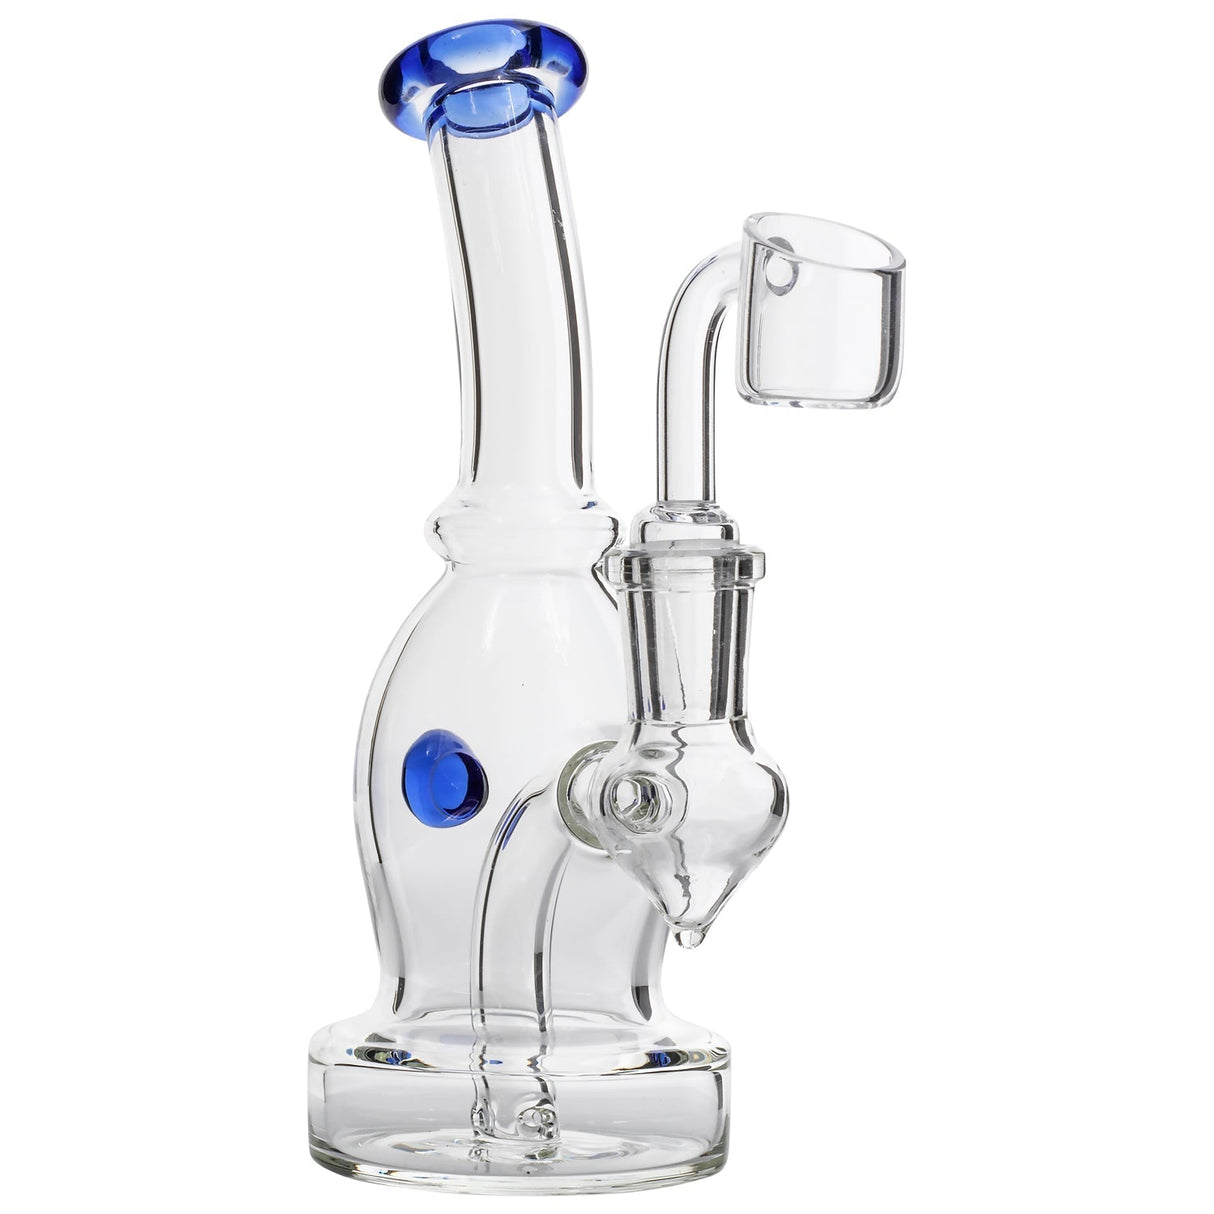 Glassic Curved Body Dab Rig with Blue Accents, Banger Hanger Design, Front View on White Background